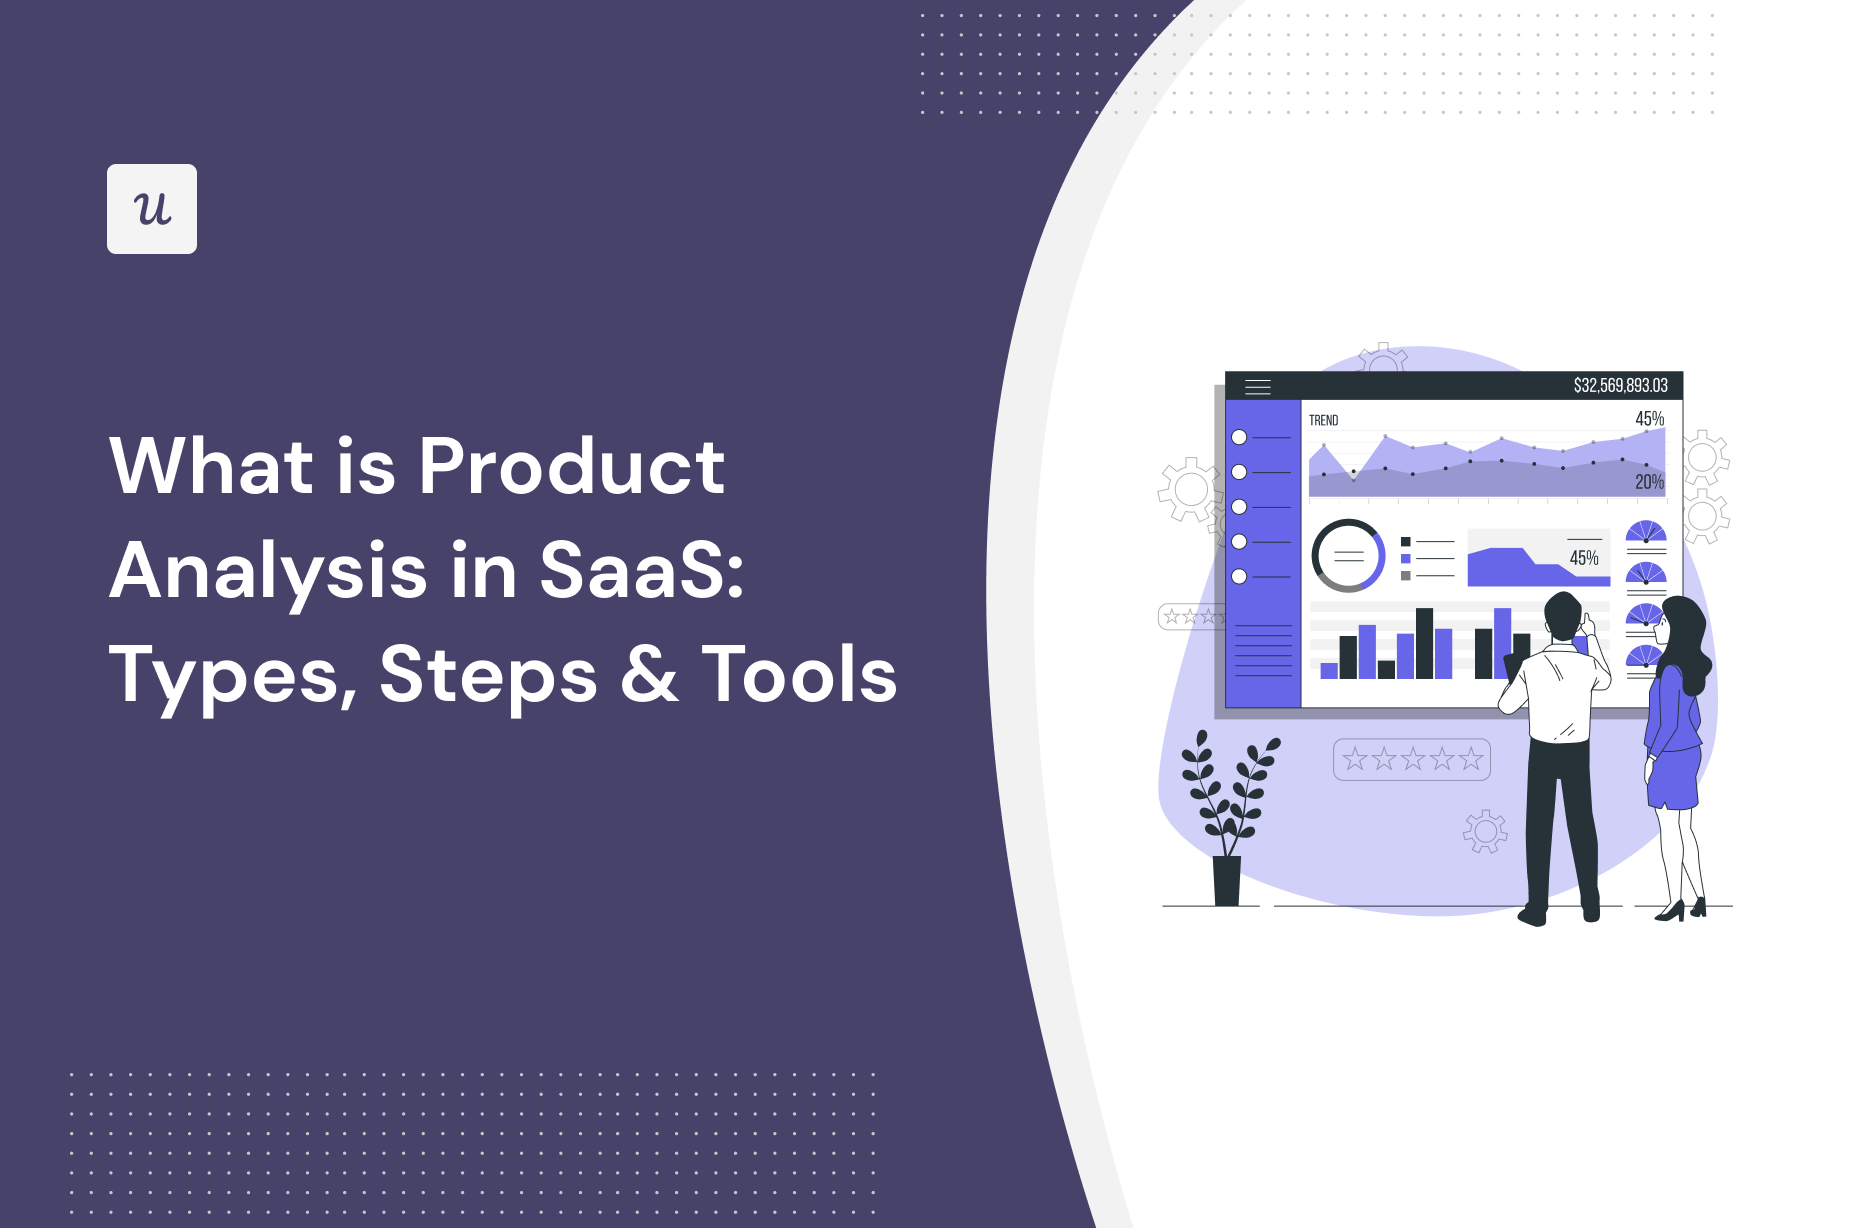 What is Product Analysis in SaaS: Types, Steps & Tools